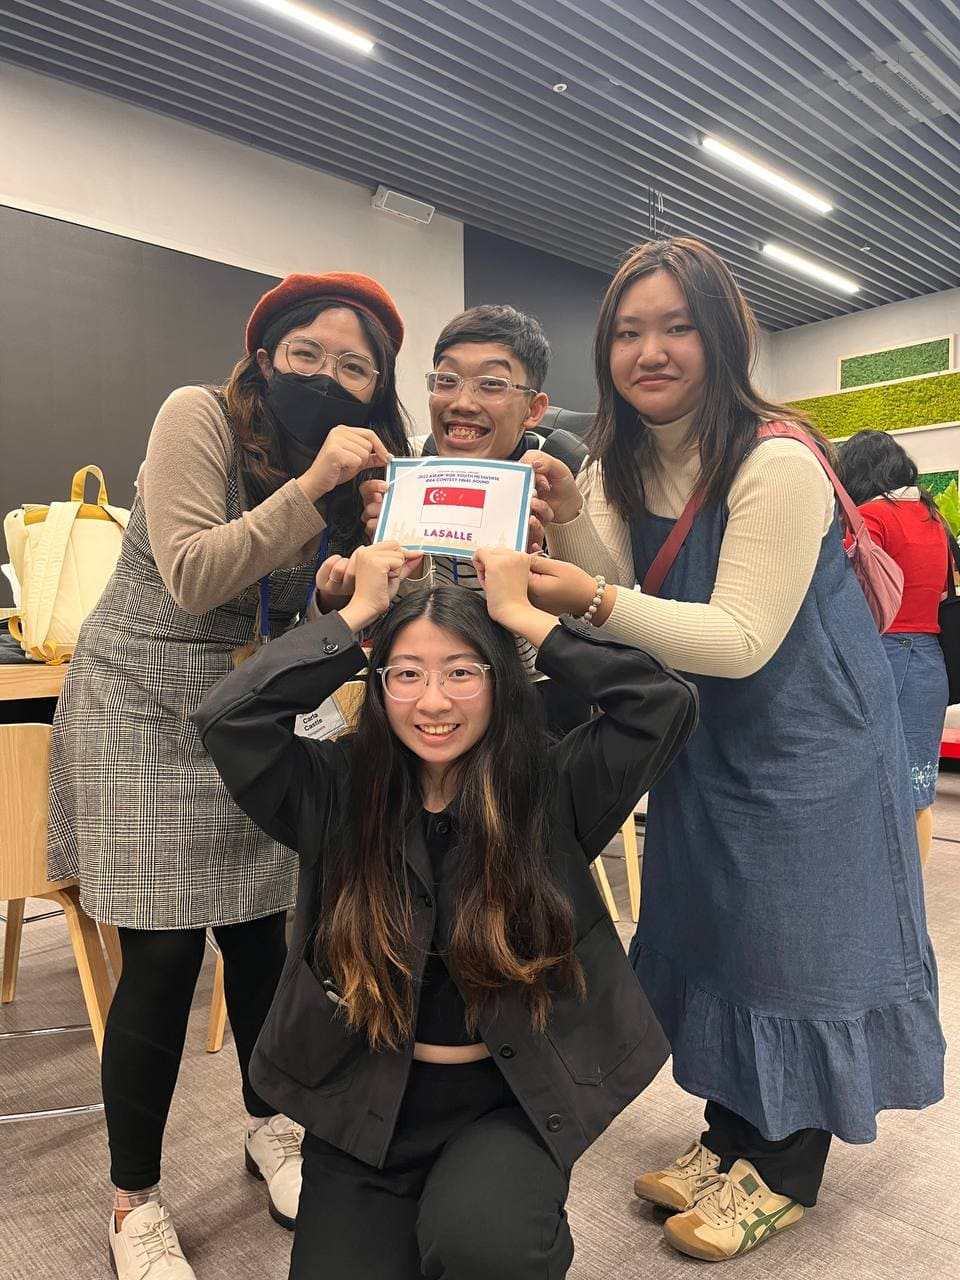 (Clockwise from left) Carla, Lionel, Angelina and Yanbing proudly displaying their finalist tag.